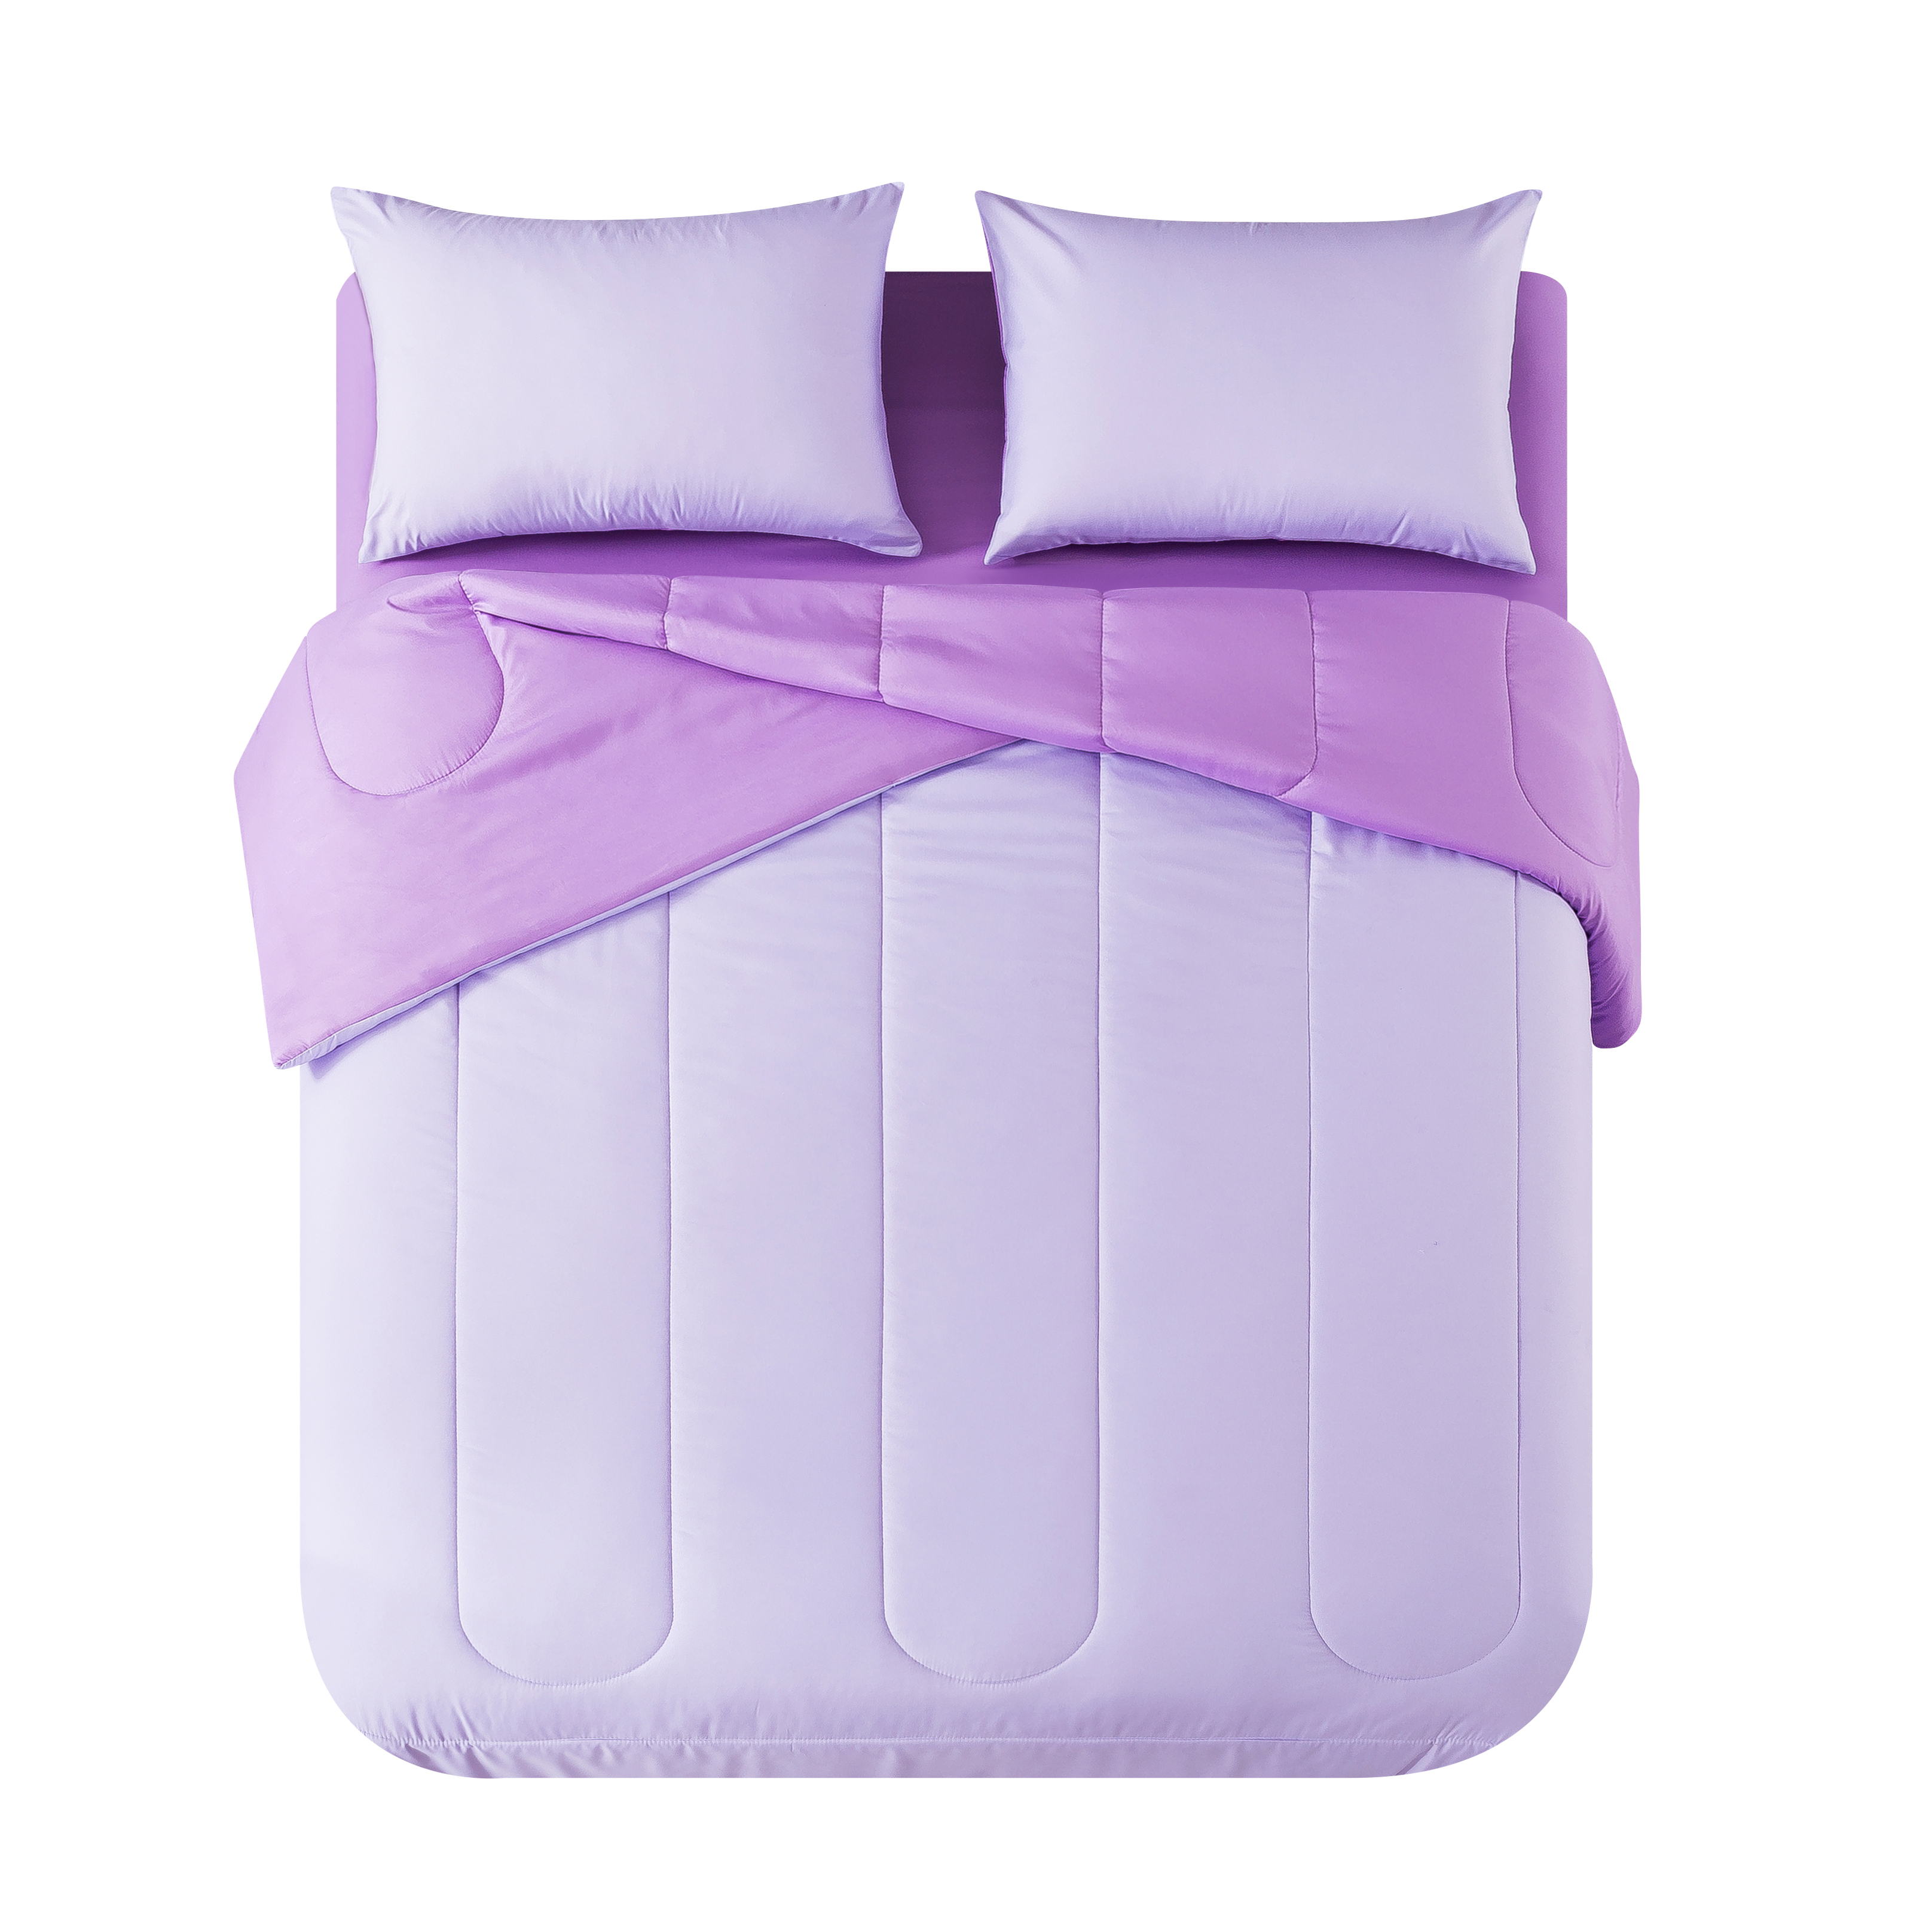 Mainstays Purple Reversible 7-Piece Bed in a Bag Comforter Set with Sheets, Queen - image 4 of 10